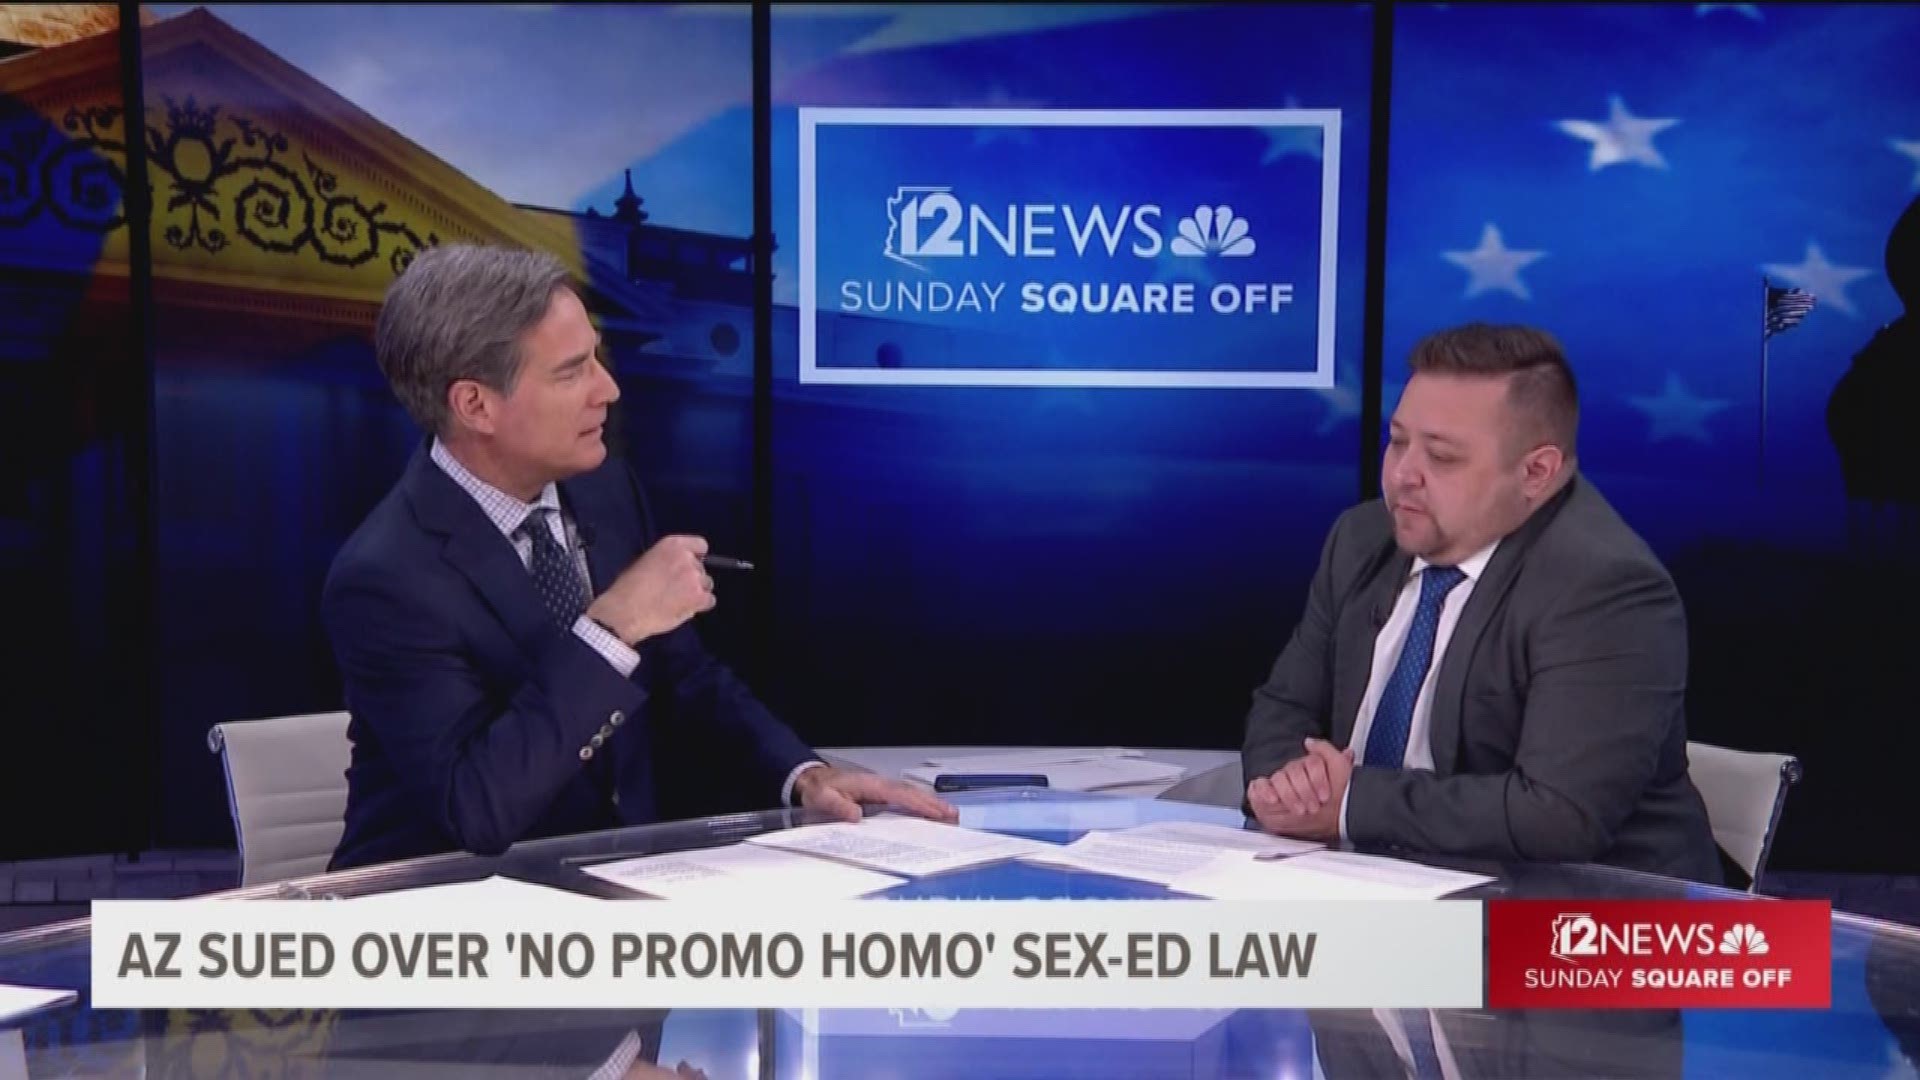 A new federal lawsuit would toss out Arizona's so-called "no promo homo" law, a 30-year-old statute that bars a positive portrayal of homosexuality in schools' sex-education classes. We hear from one of the plaintiffs, Michael Soto, executive director of Equality Arizona.